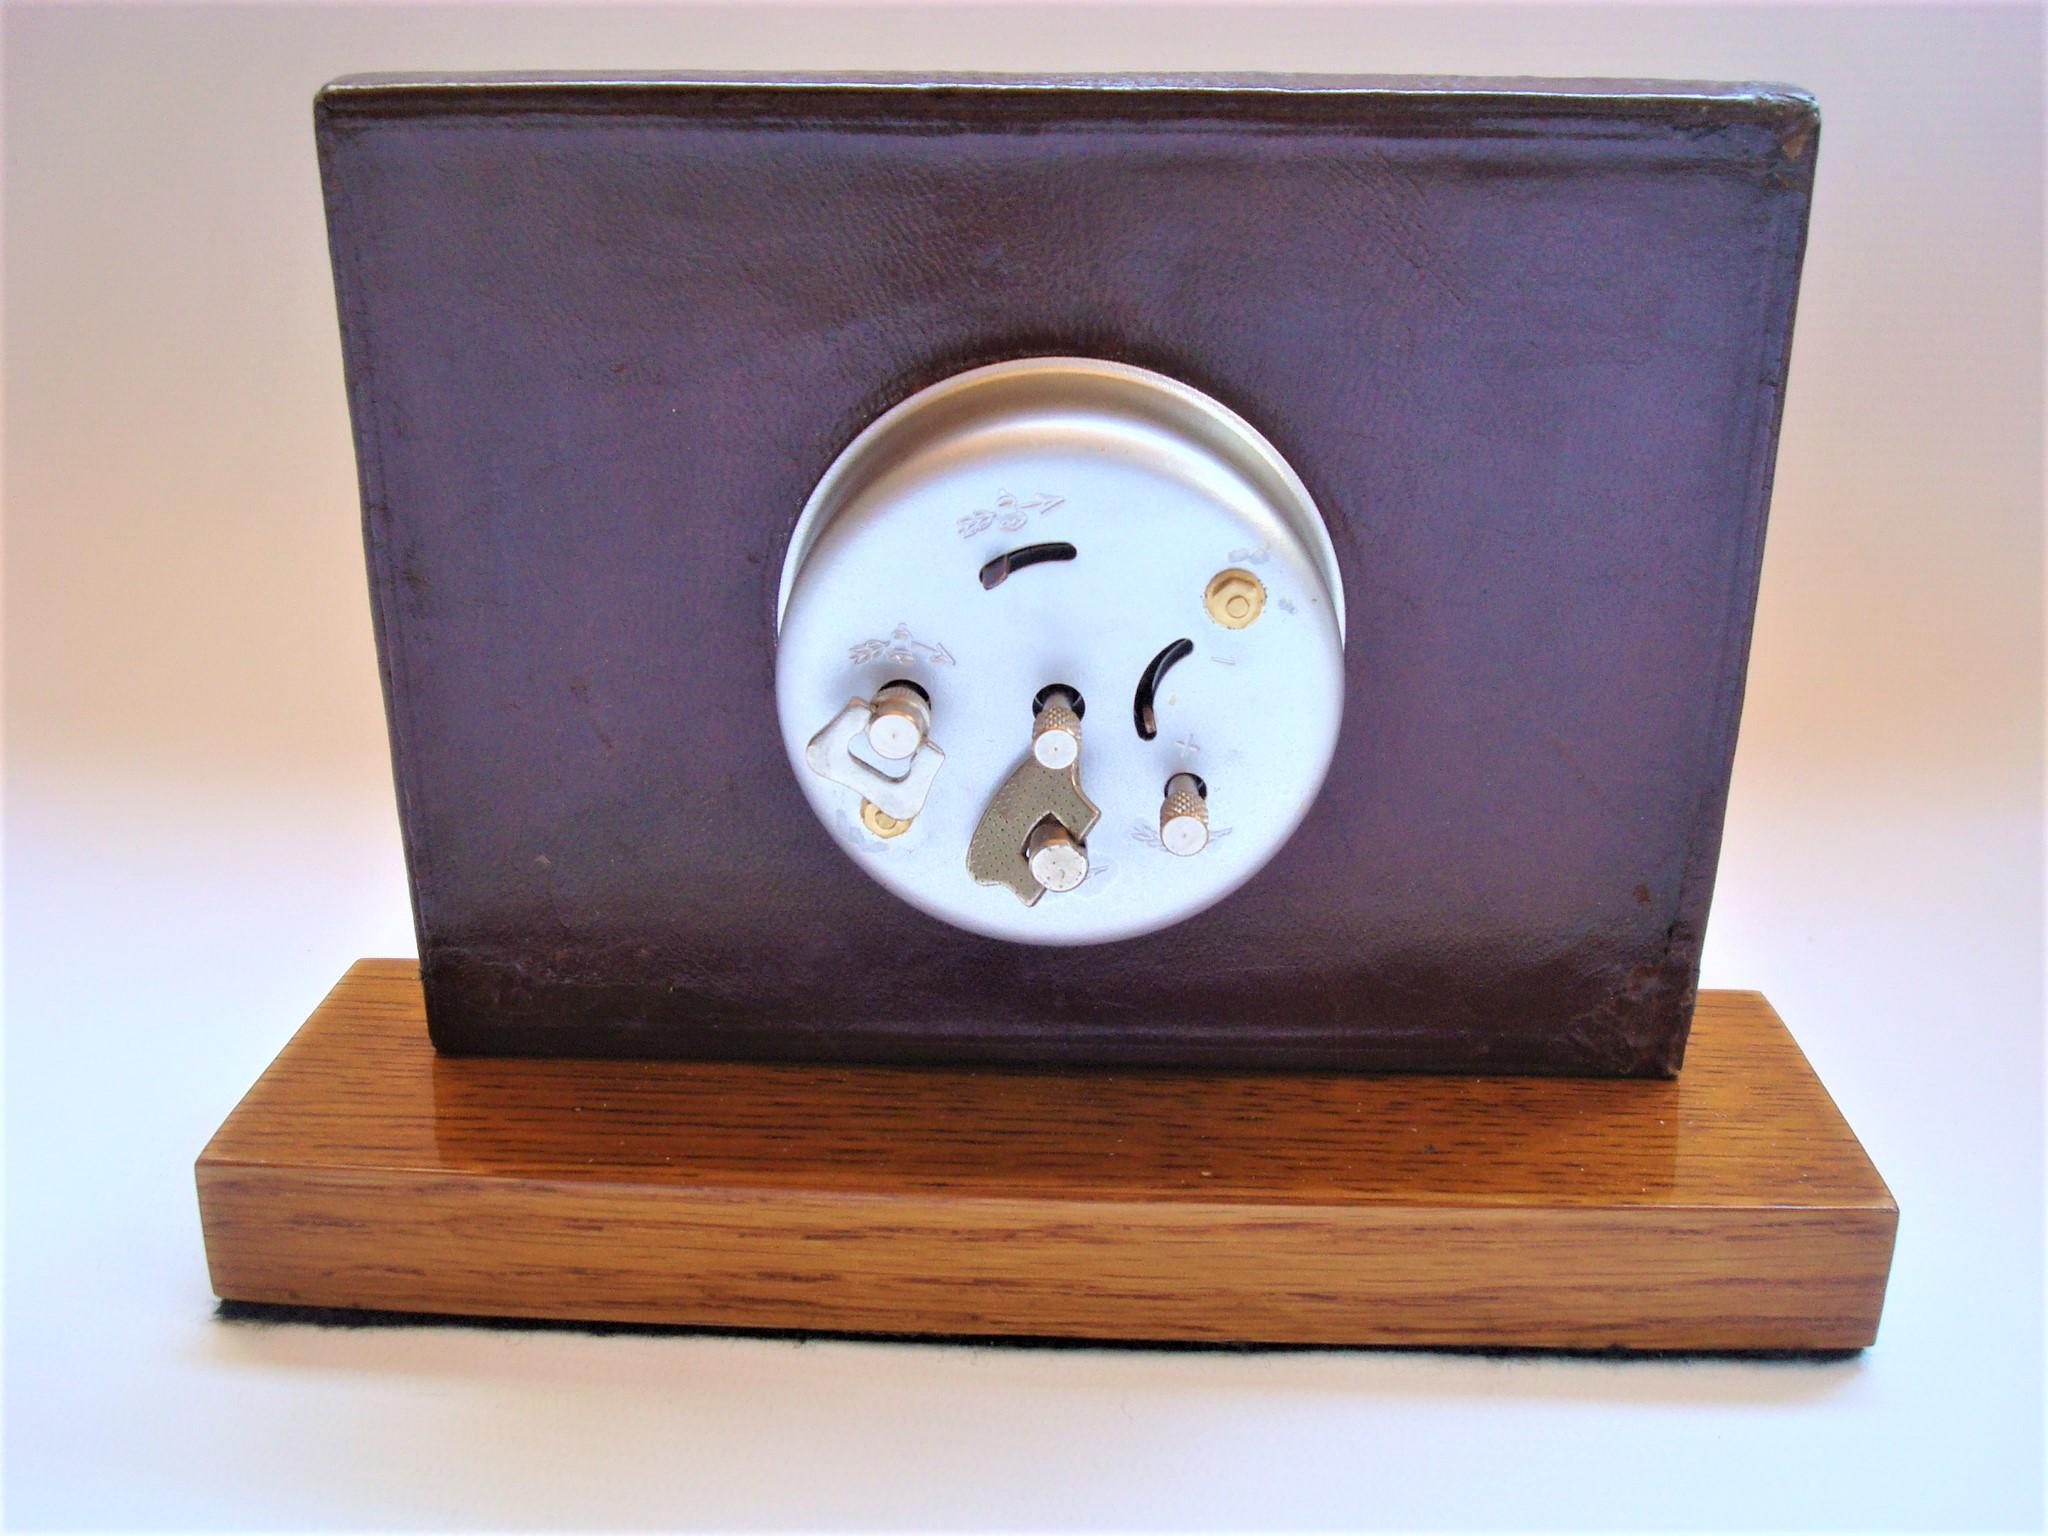 20th Century French Handstitched Brown Leather Desk Clock by Bayard, 1950´s For Sale